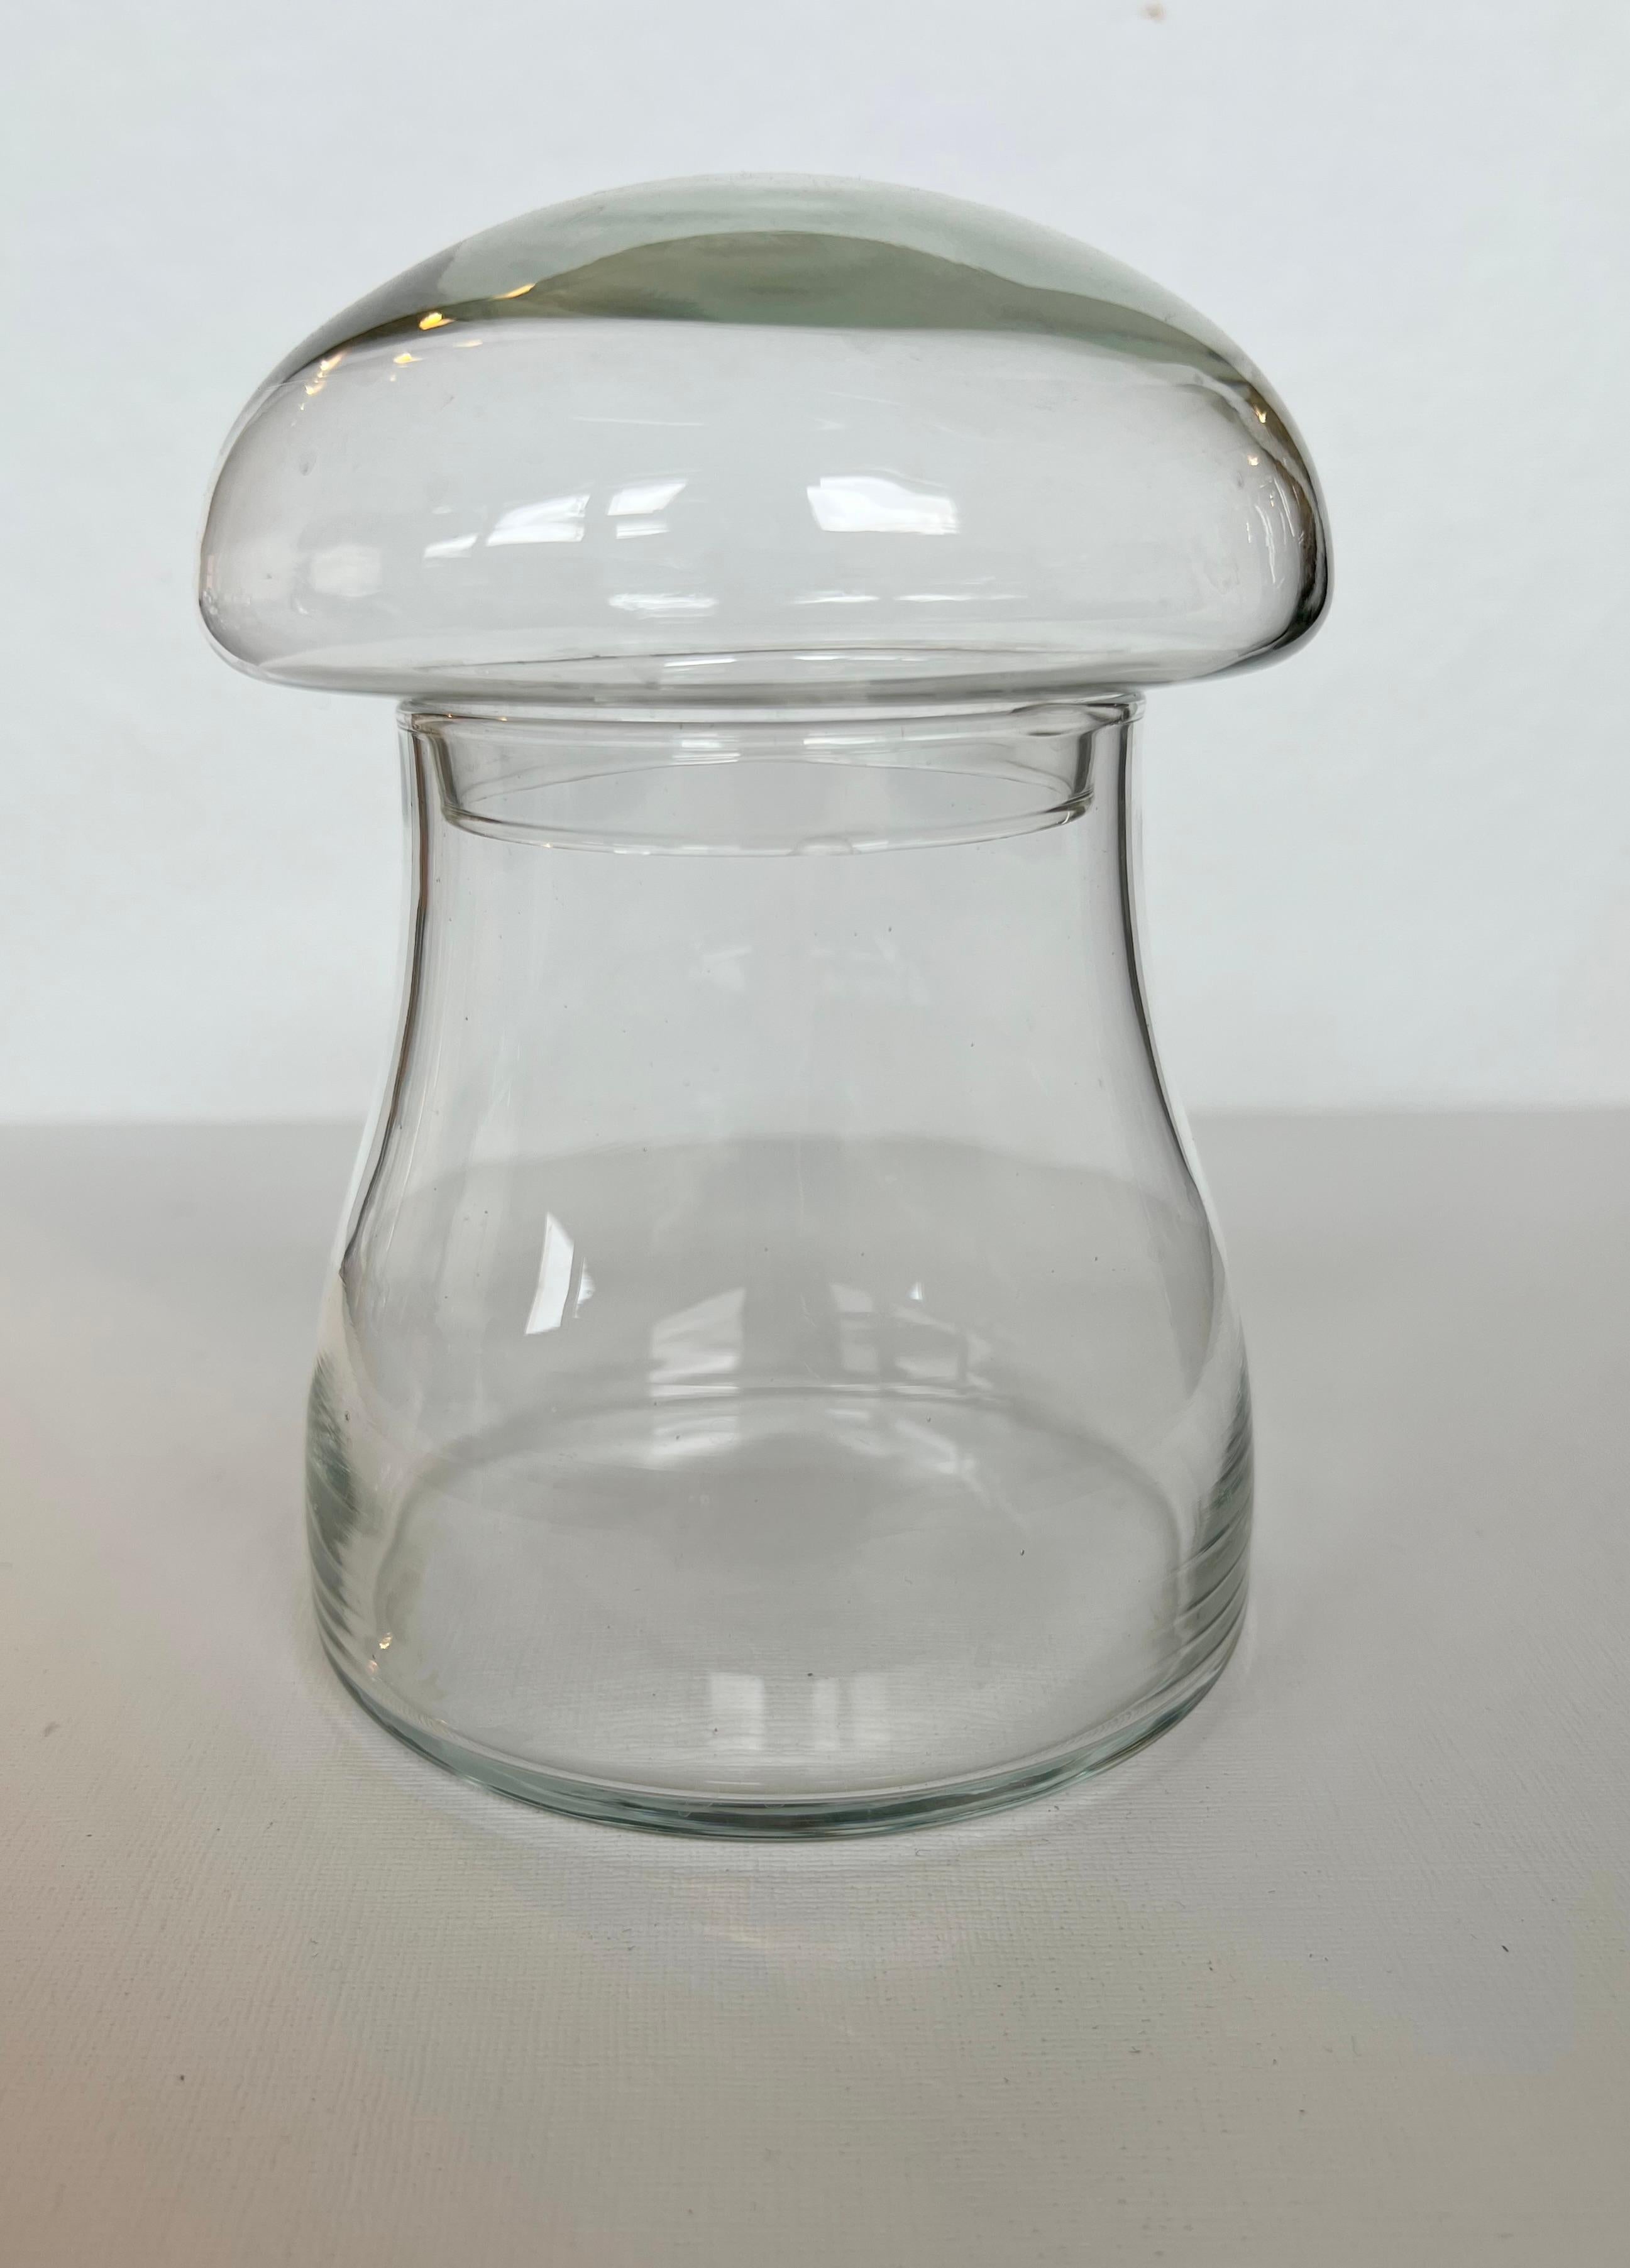 Sweetest vintage glass jar in the shape of a mushroom, circa 1960s-1970s made by Libbey Glass Co.  The lid is removable and fits snuggly on the jar.  It would make a beautiful terrarium.